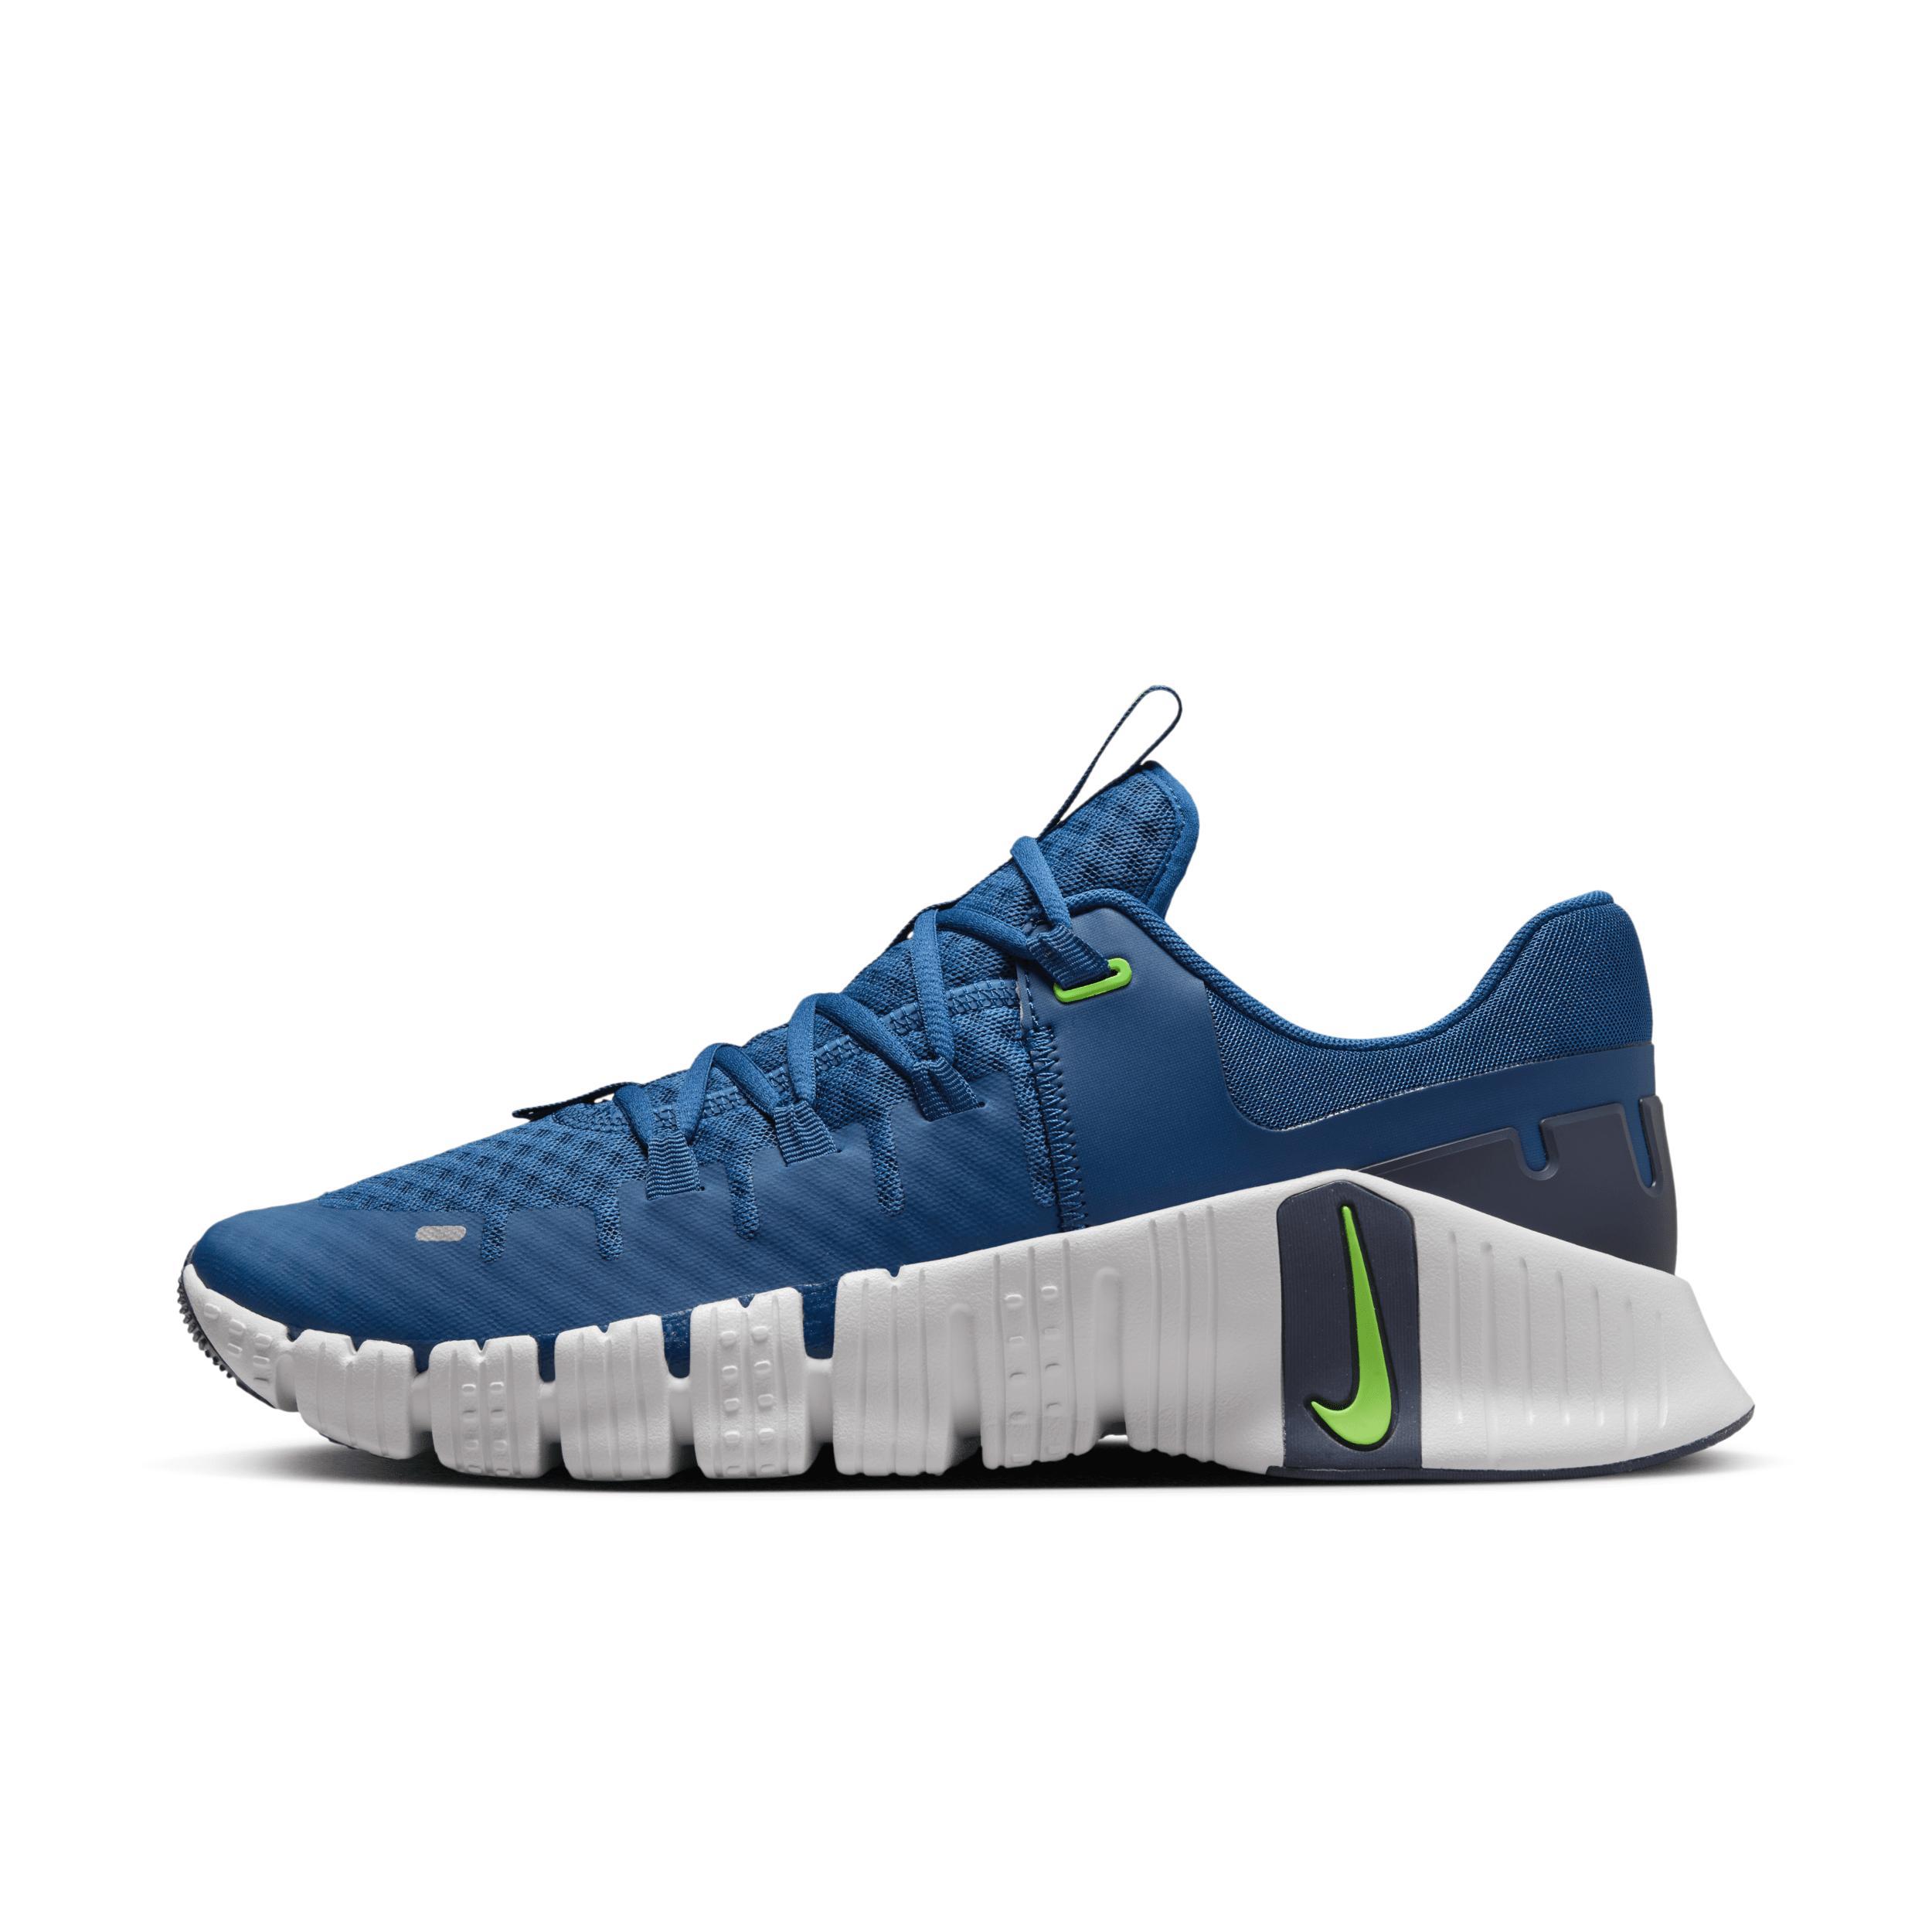 Nike Free Metcon 5 Men's Workout Shoes Product Image